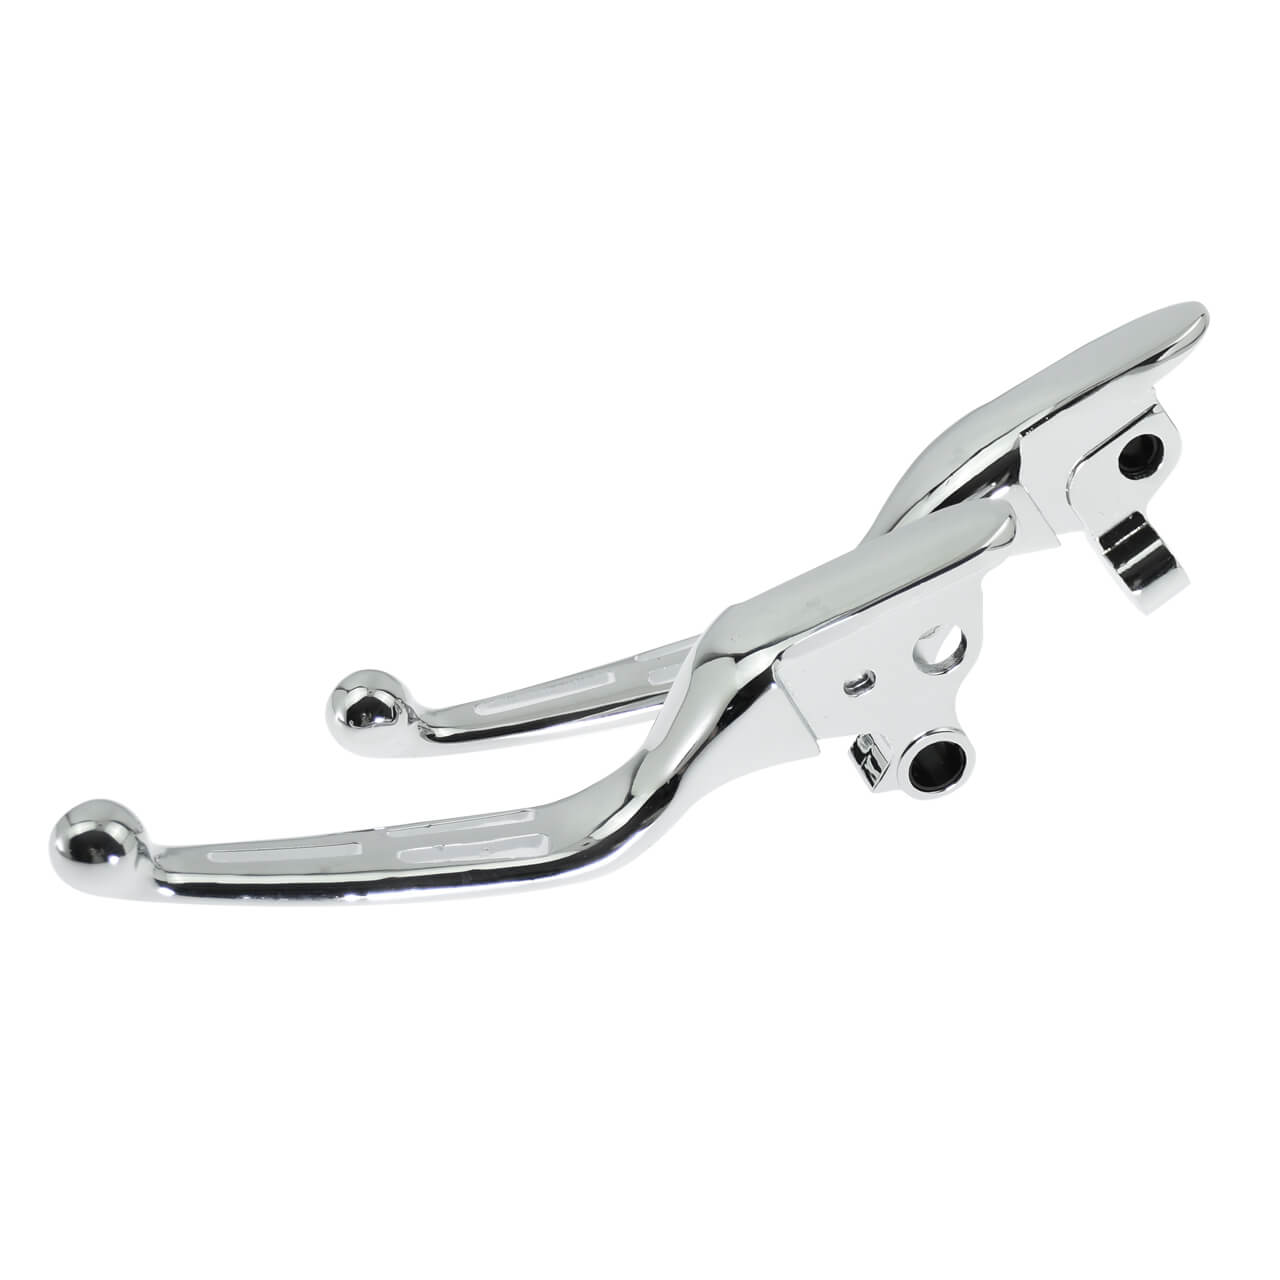 brake-Clutch-Lever-for-harley-mactions-GP002401